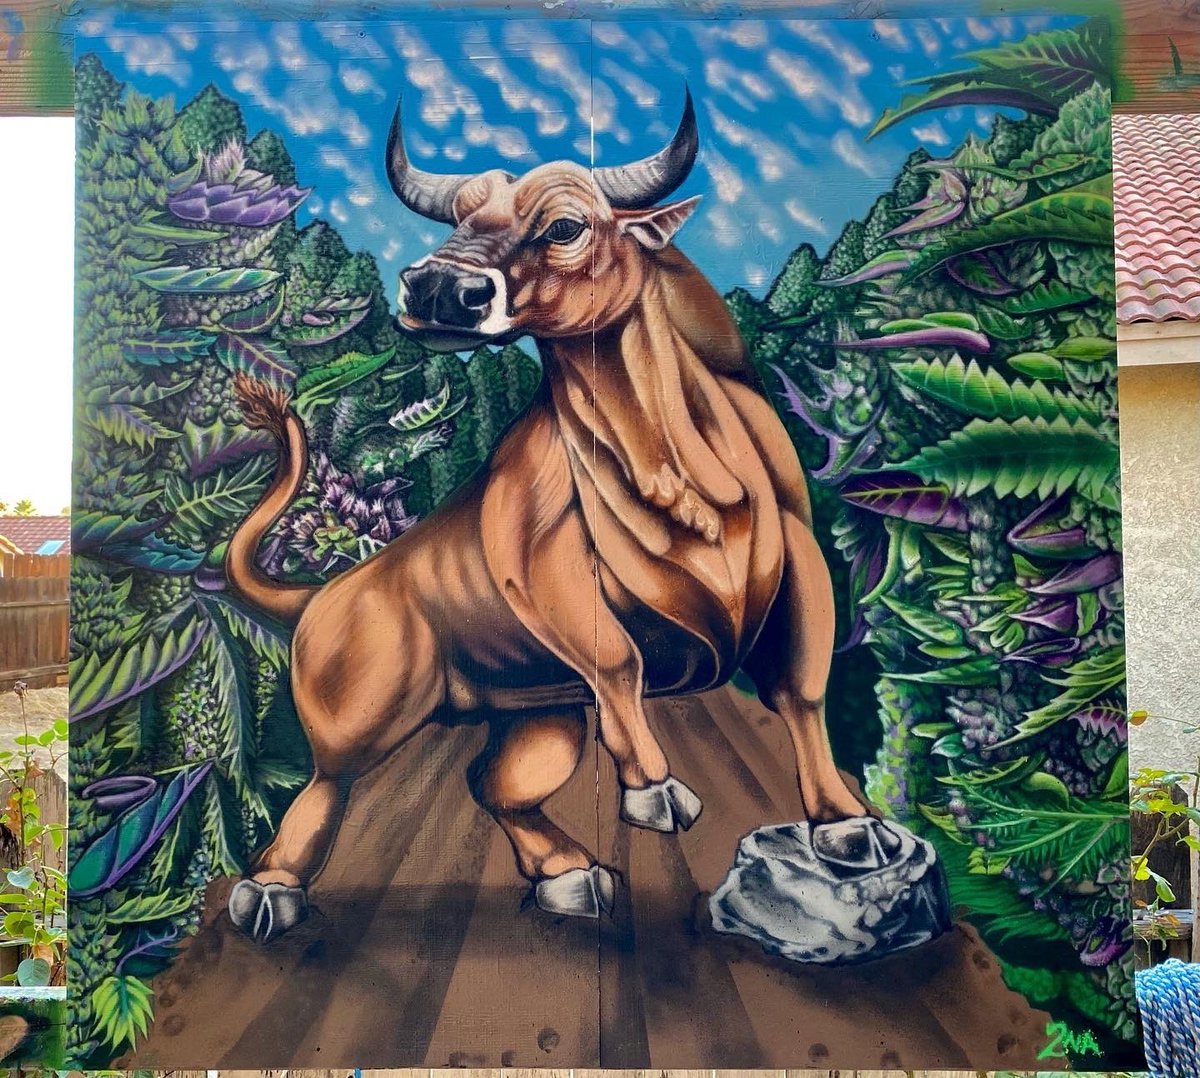 BACK ON MY BULLSHIT!!! My newest painting called “The Green Ox” has a new home in Garberville CA. Thank yous go out to @synergyjo4263 (Joelle Geppert) for putting up to the task!! HAPPY BIRTHDAY!!! Nuff love and respect to you, your family and your company!!